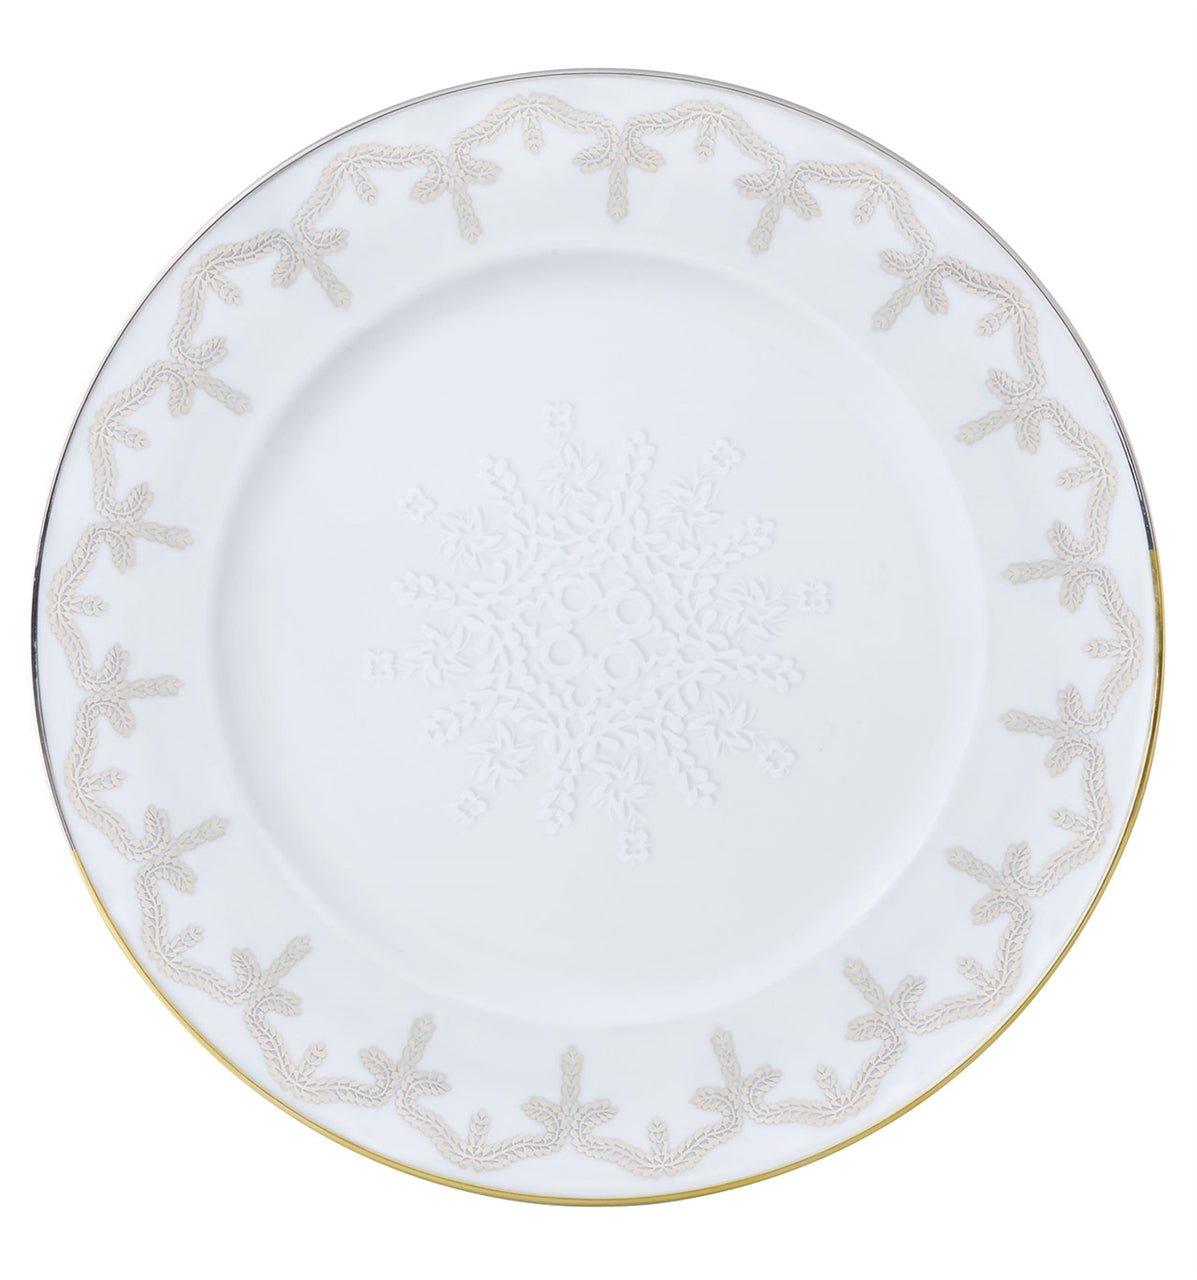 Paseo - Dinner Plate (4 plates) - LAZADO